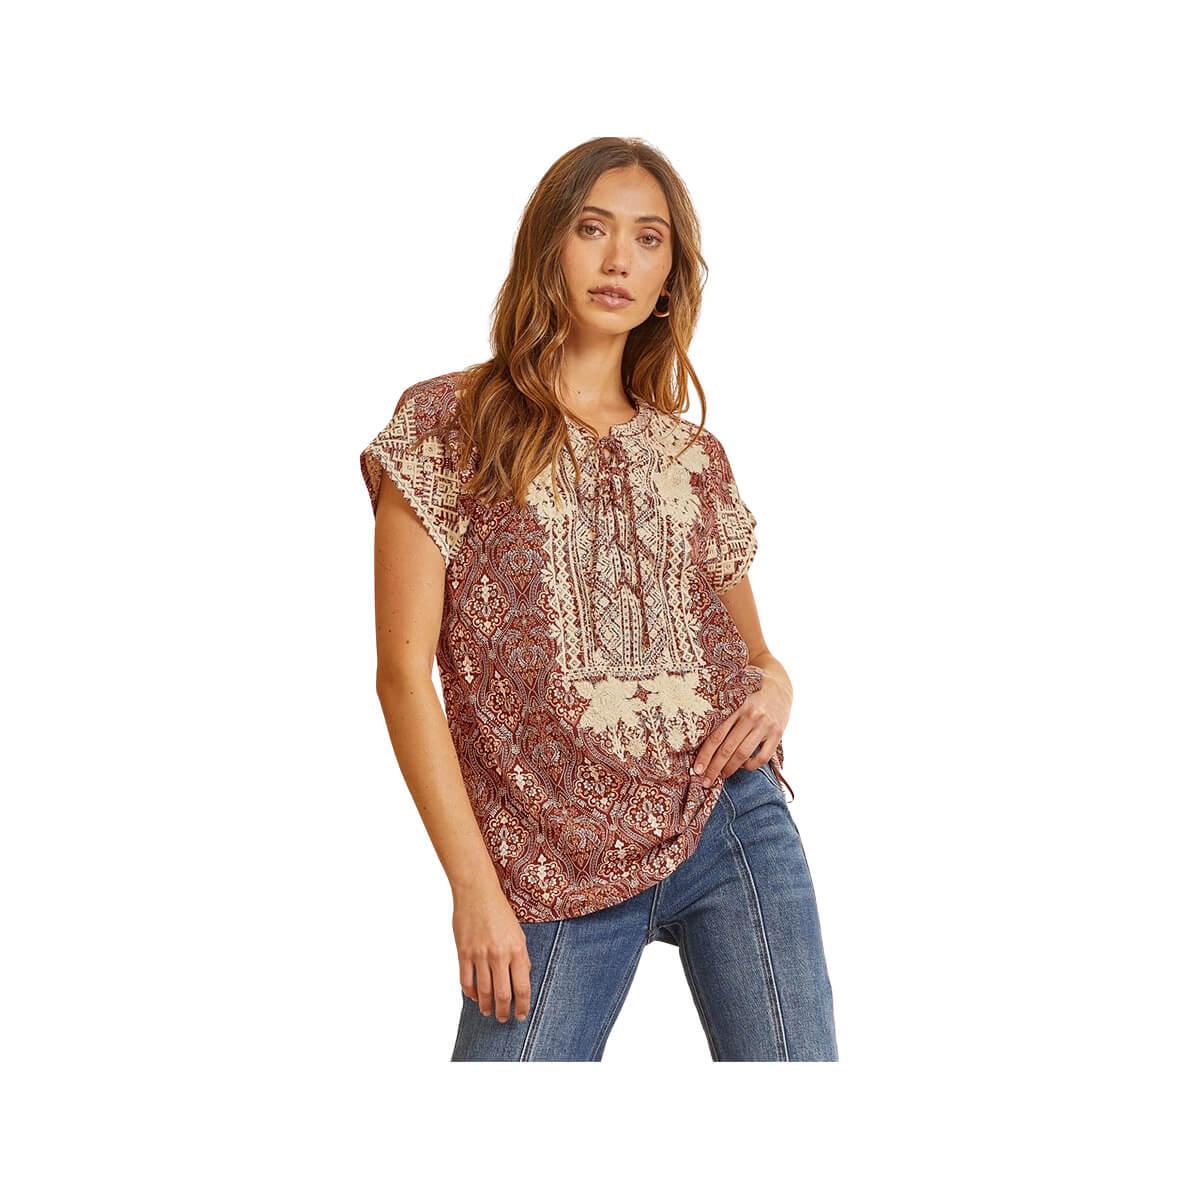  Women's Rust Print Short Sleeve Embroidered Top